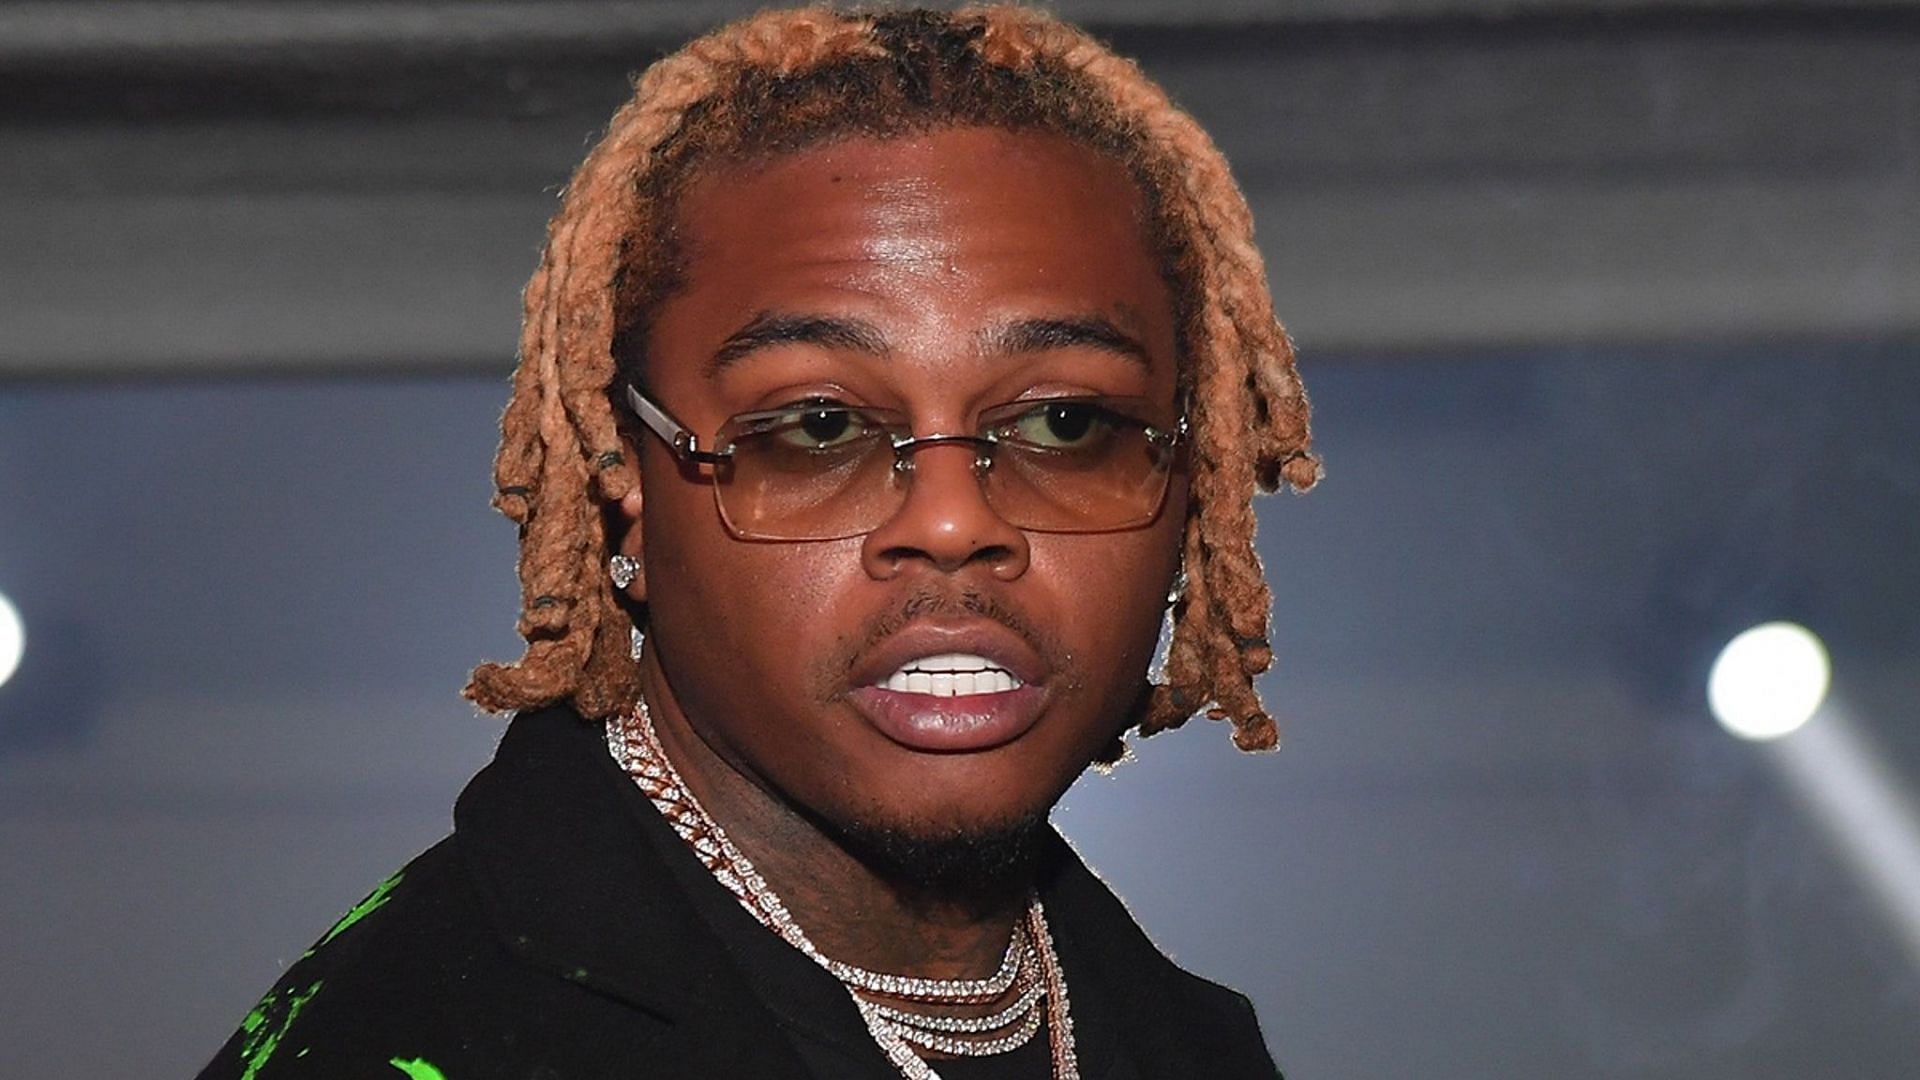 Gunna to be released from jail amidst YSL RICO case (Image via Getty Images)